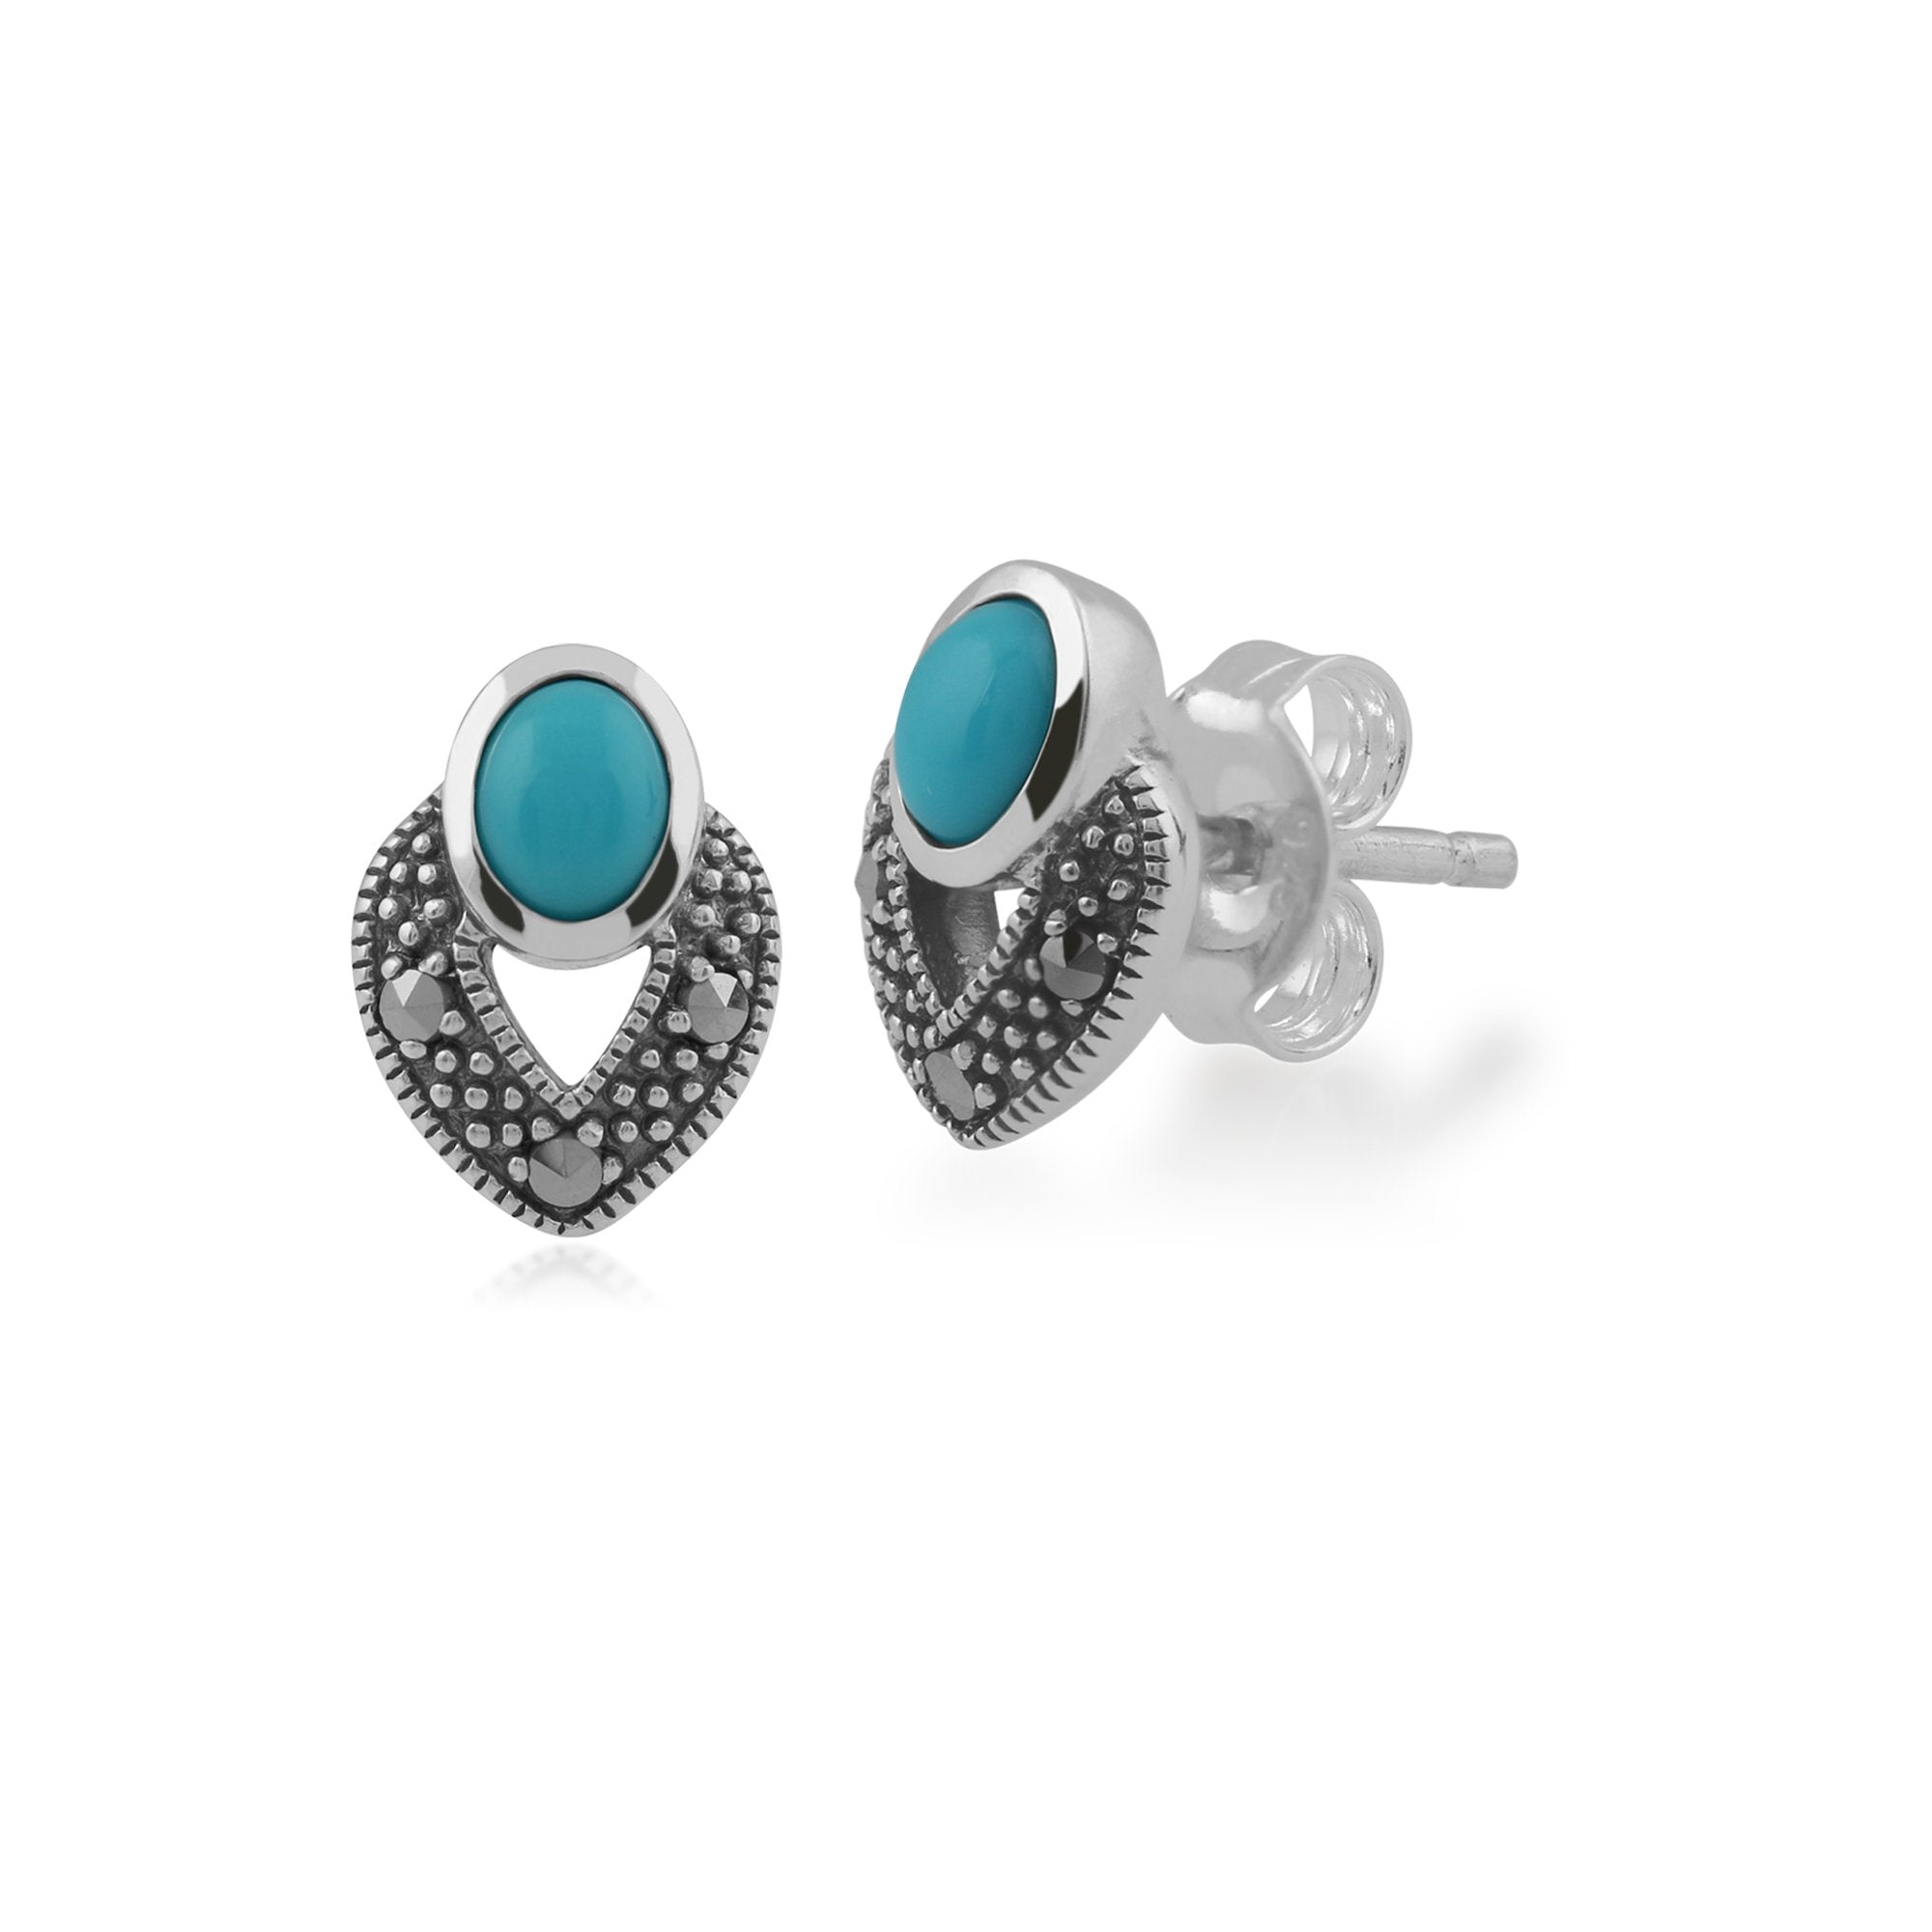 Art Deco Style Oval Turquoise & Marcasite Stud Earrings & Pendant Set in 925 Sterling Silver